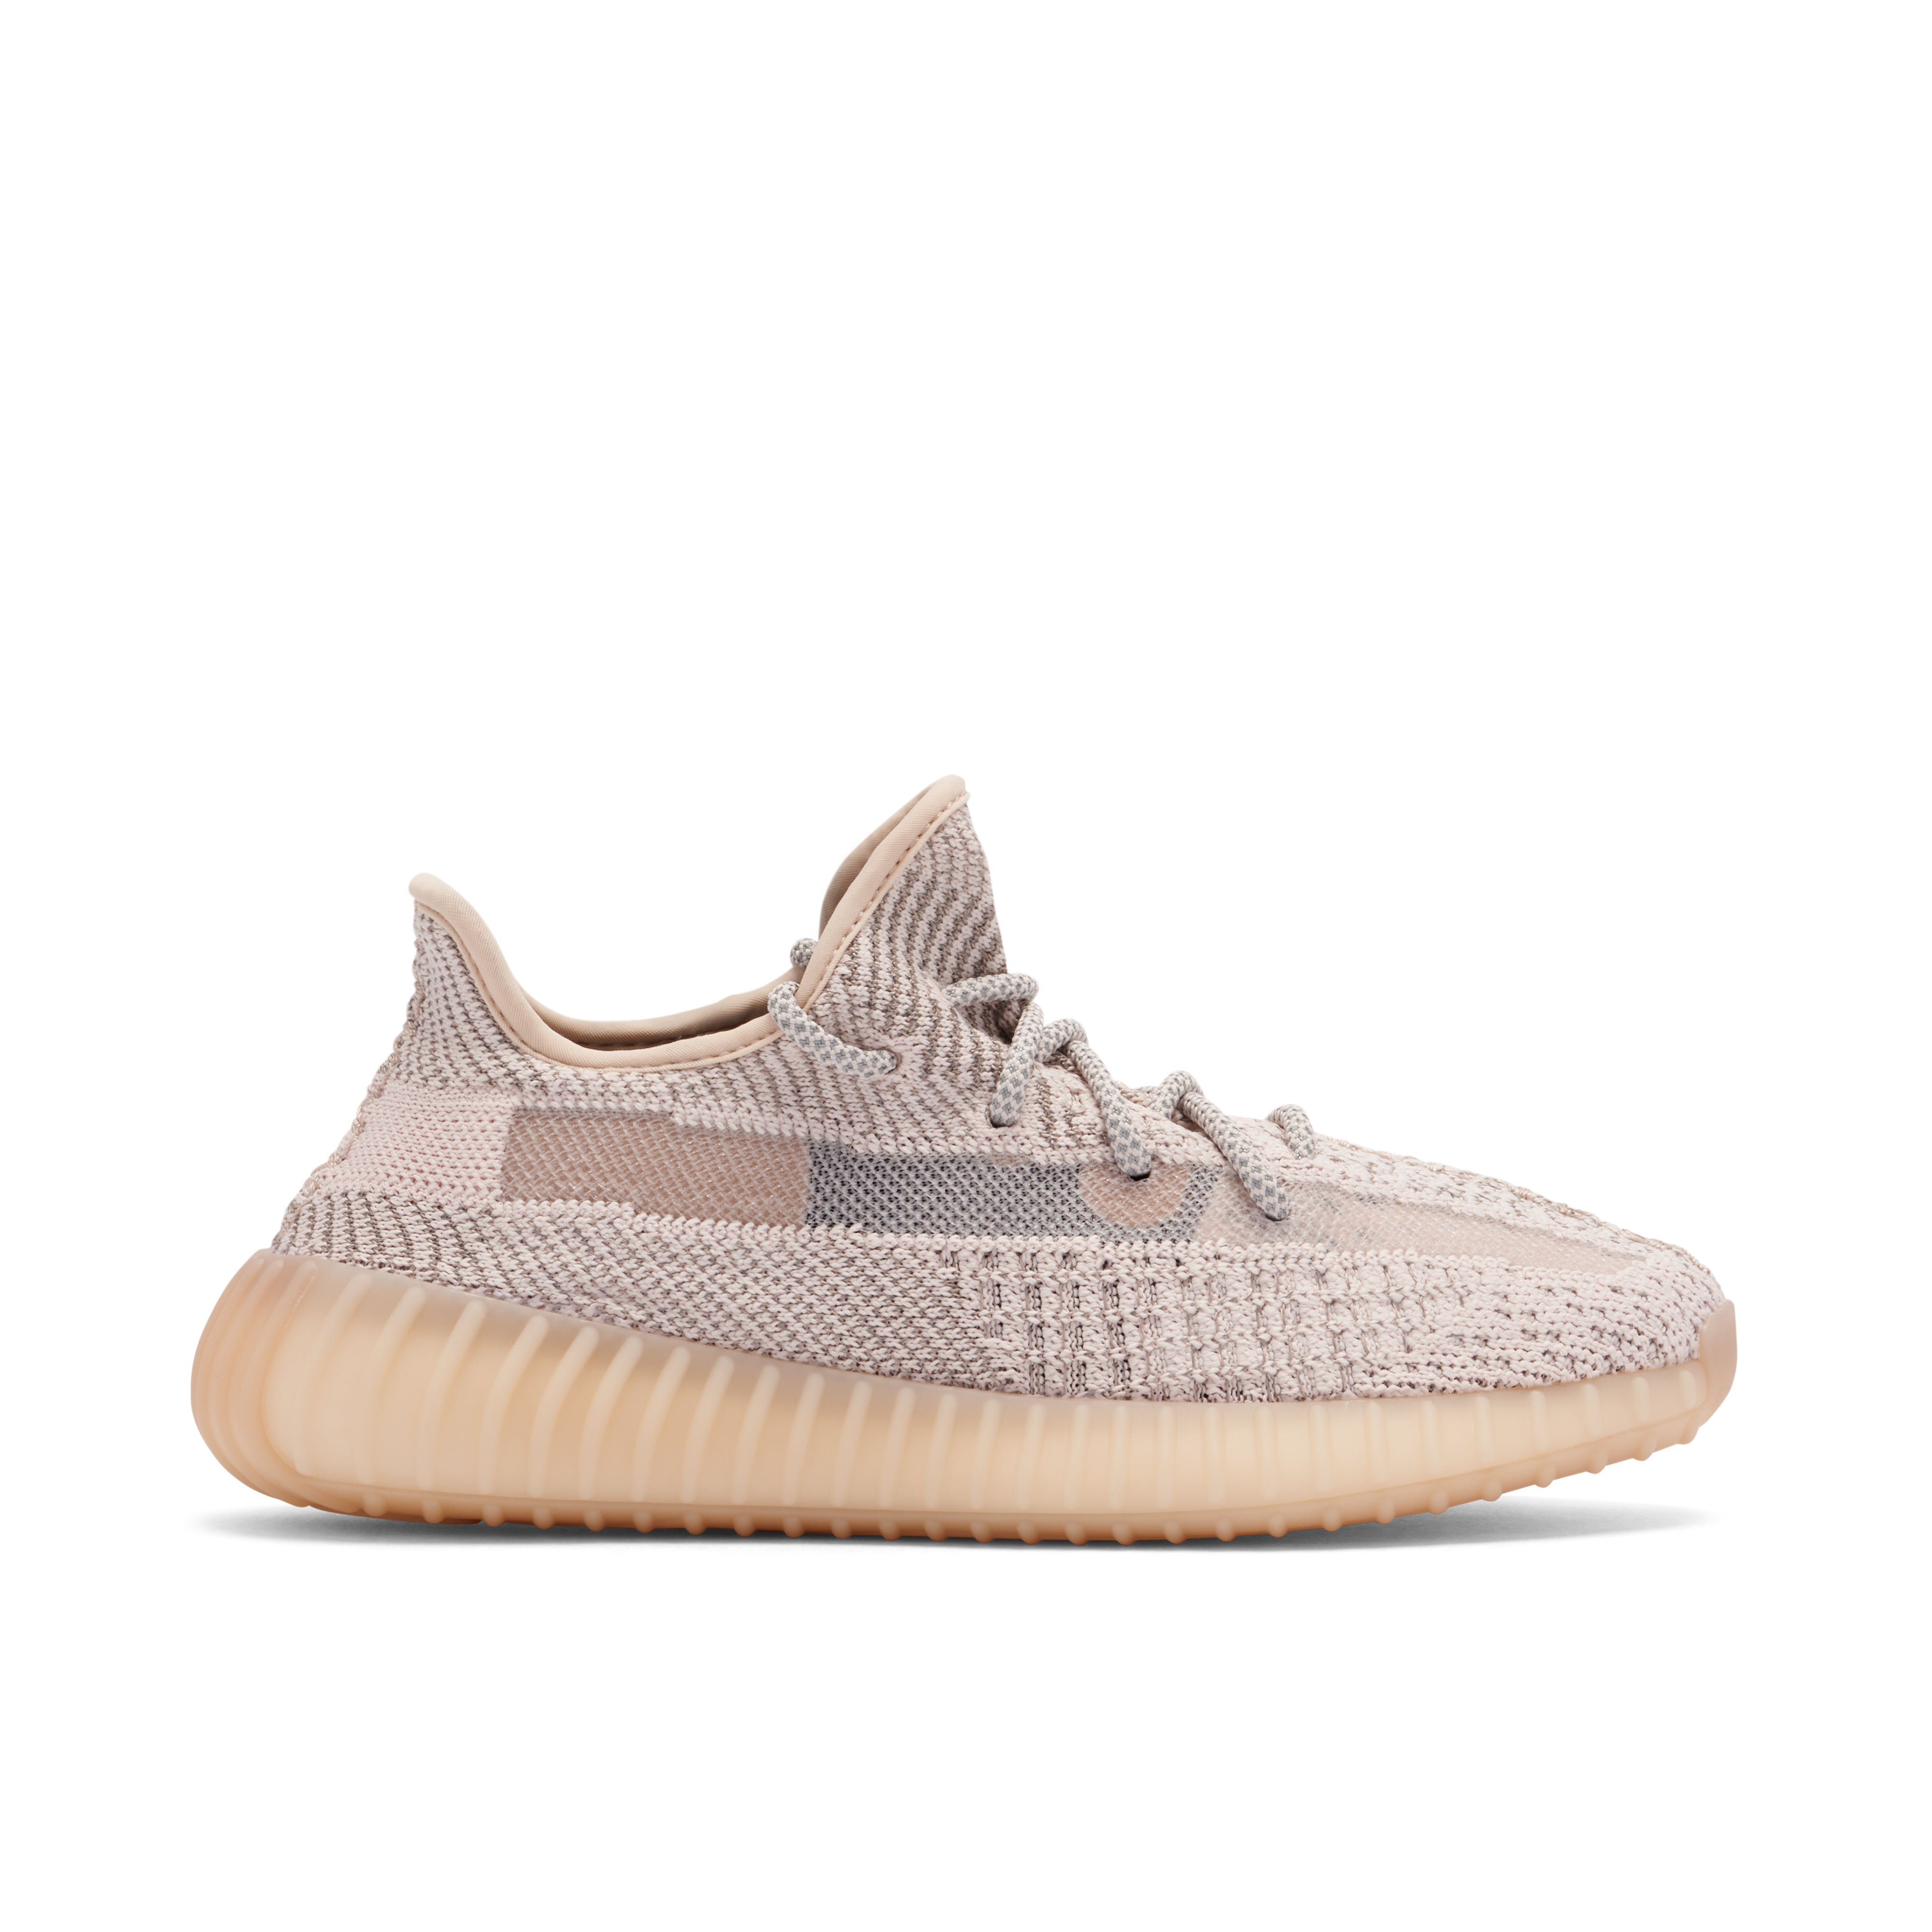 26.0 YEEZY BOOST 350 V2 SYNTH